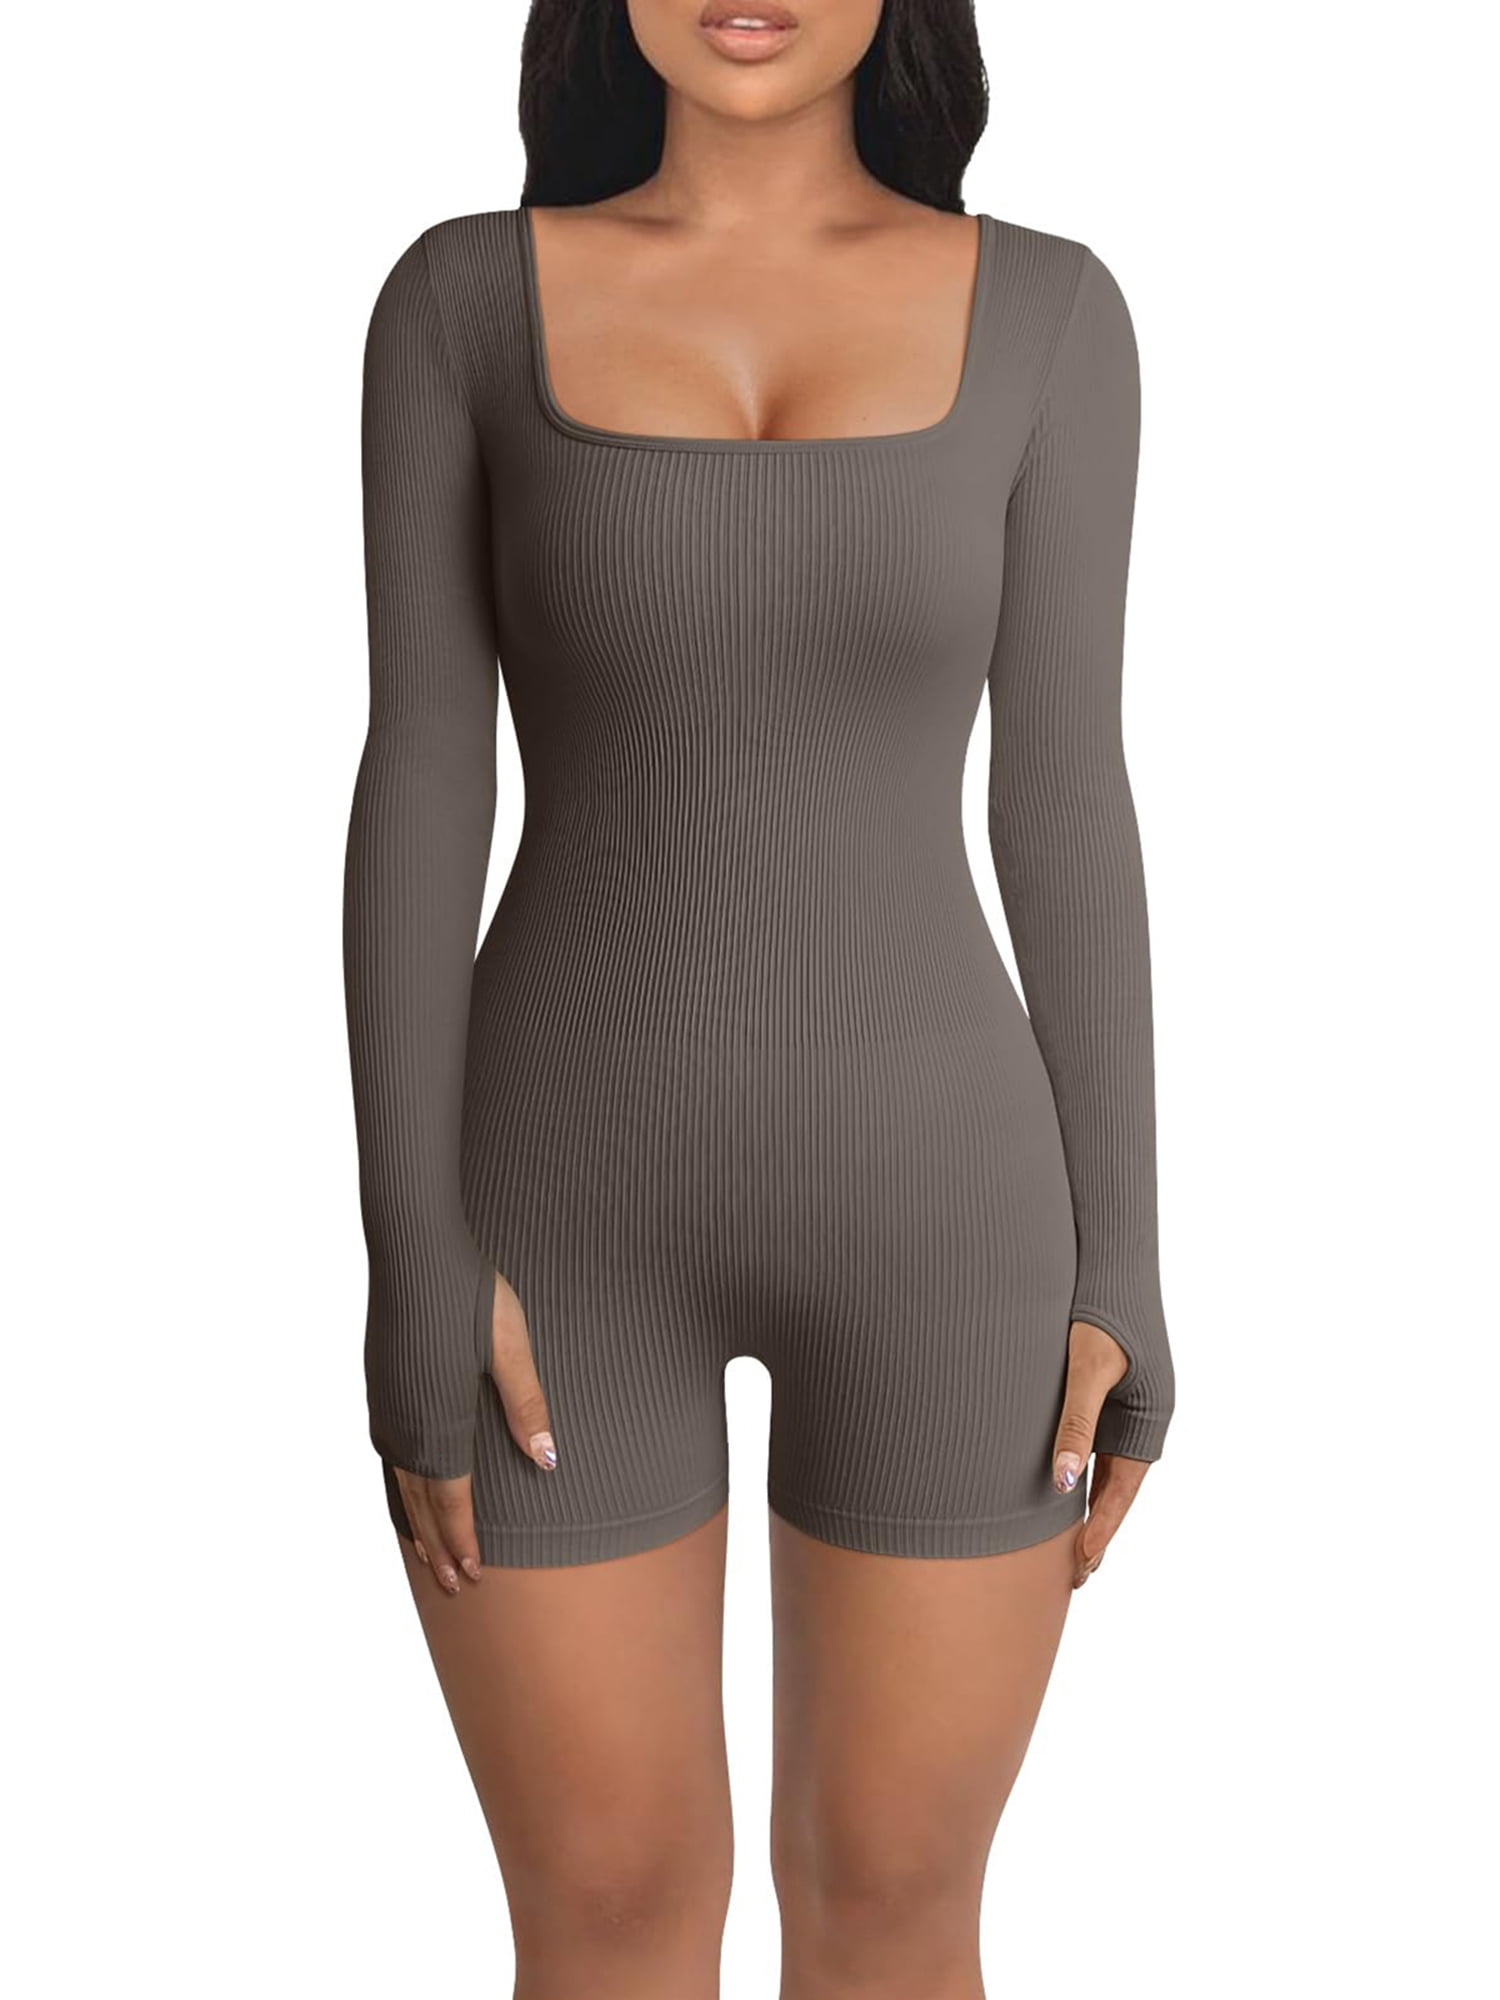 OQQ Summer Yoga One Piece Outfit: Basic Solid Jumpsuit With Skinny Shorts  For Women Bodycon Bodysuit For Yoga, Sports, And Casual Wear Ropa 230825  From Kua09, $9.42